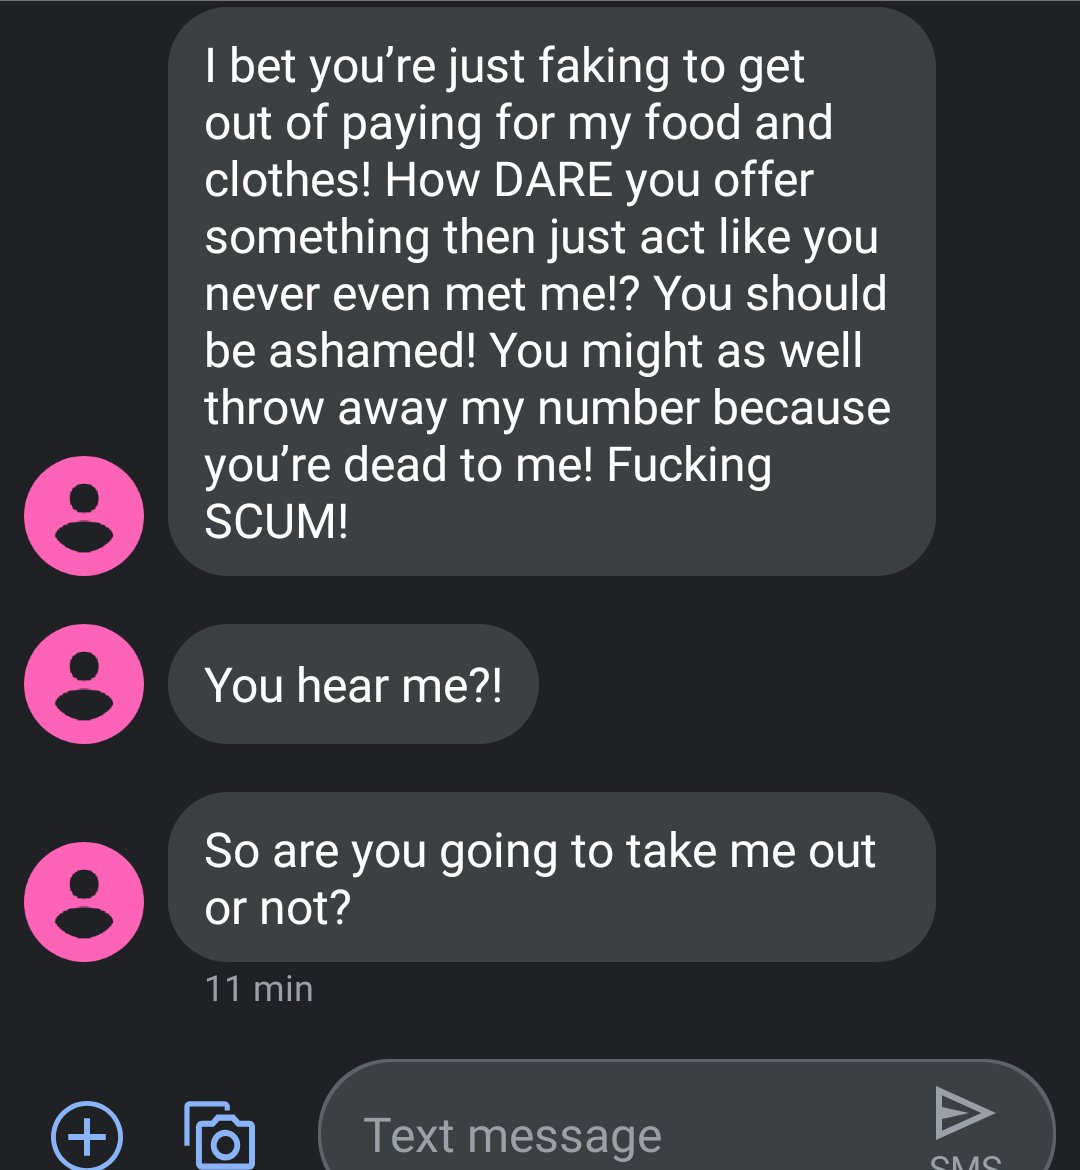 lyrics - I bet you're just faking to get out of paying for my food and clothes! How Dare you offer something then just act you never even met me!? You should be ashamed! You might as well throw away my number because you're dead to me! Fucking Scum! You h